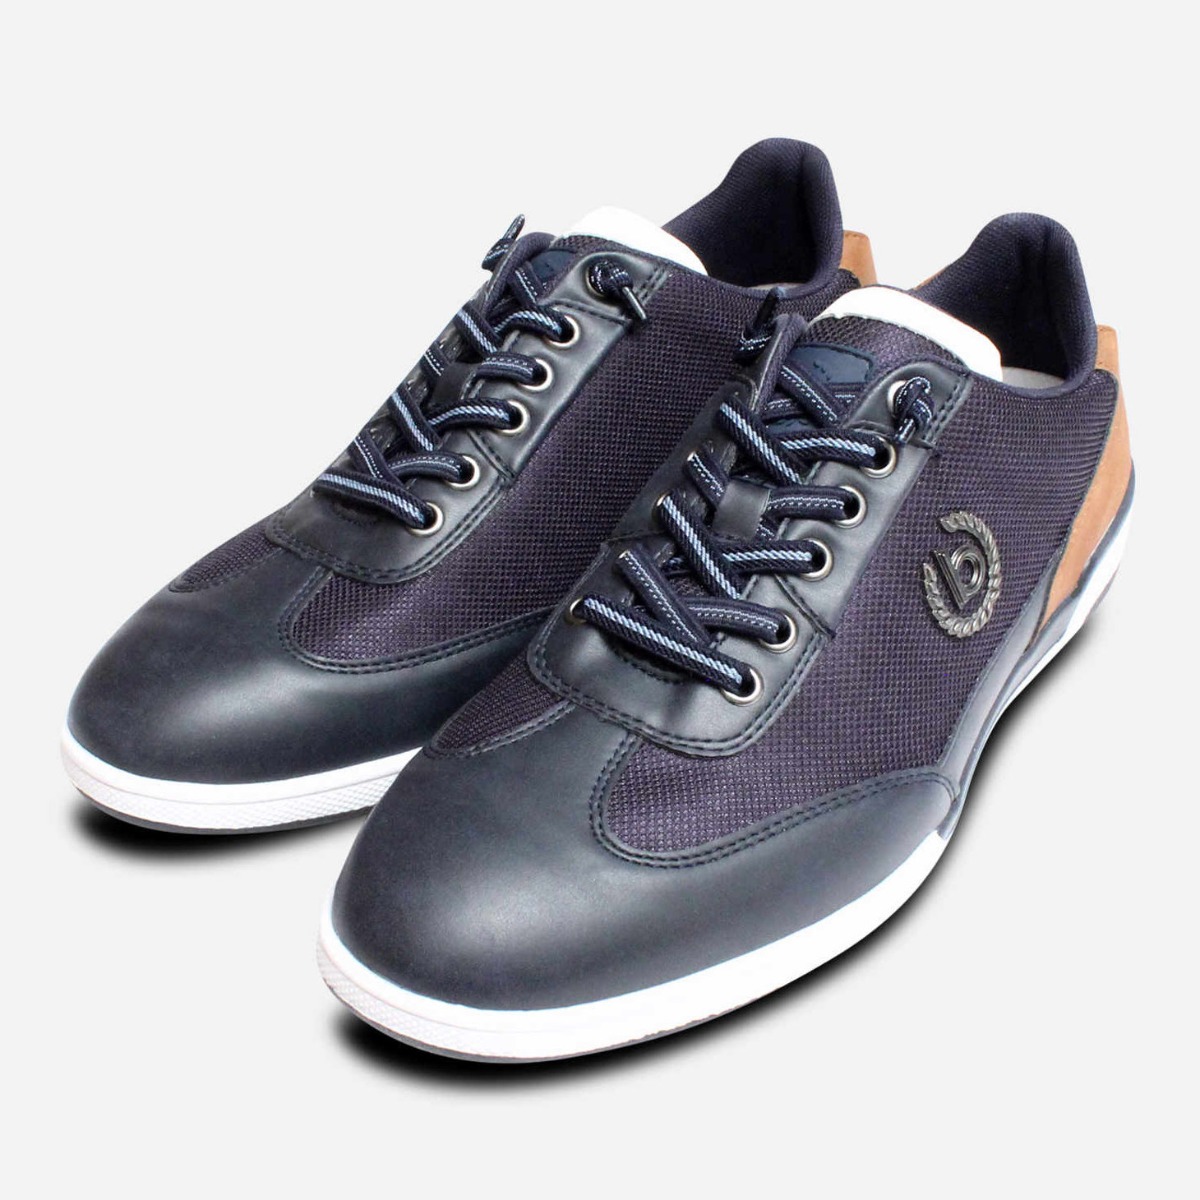 navy blue trainers mens